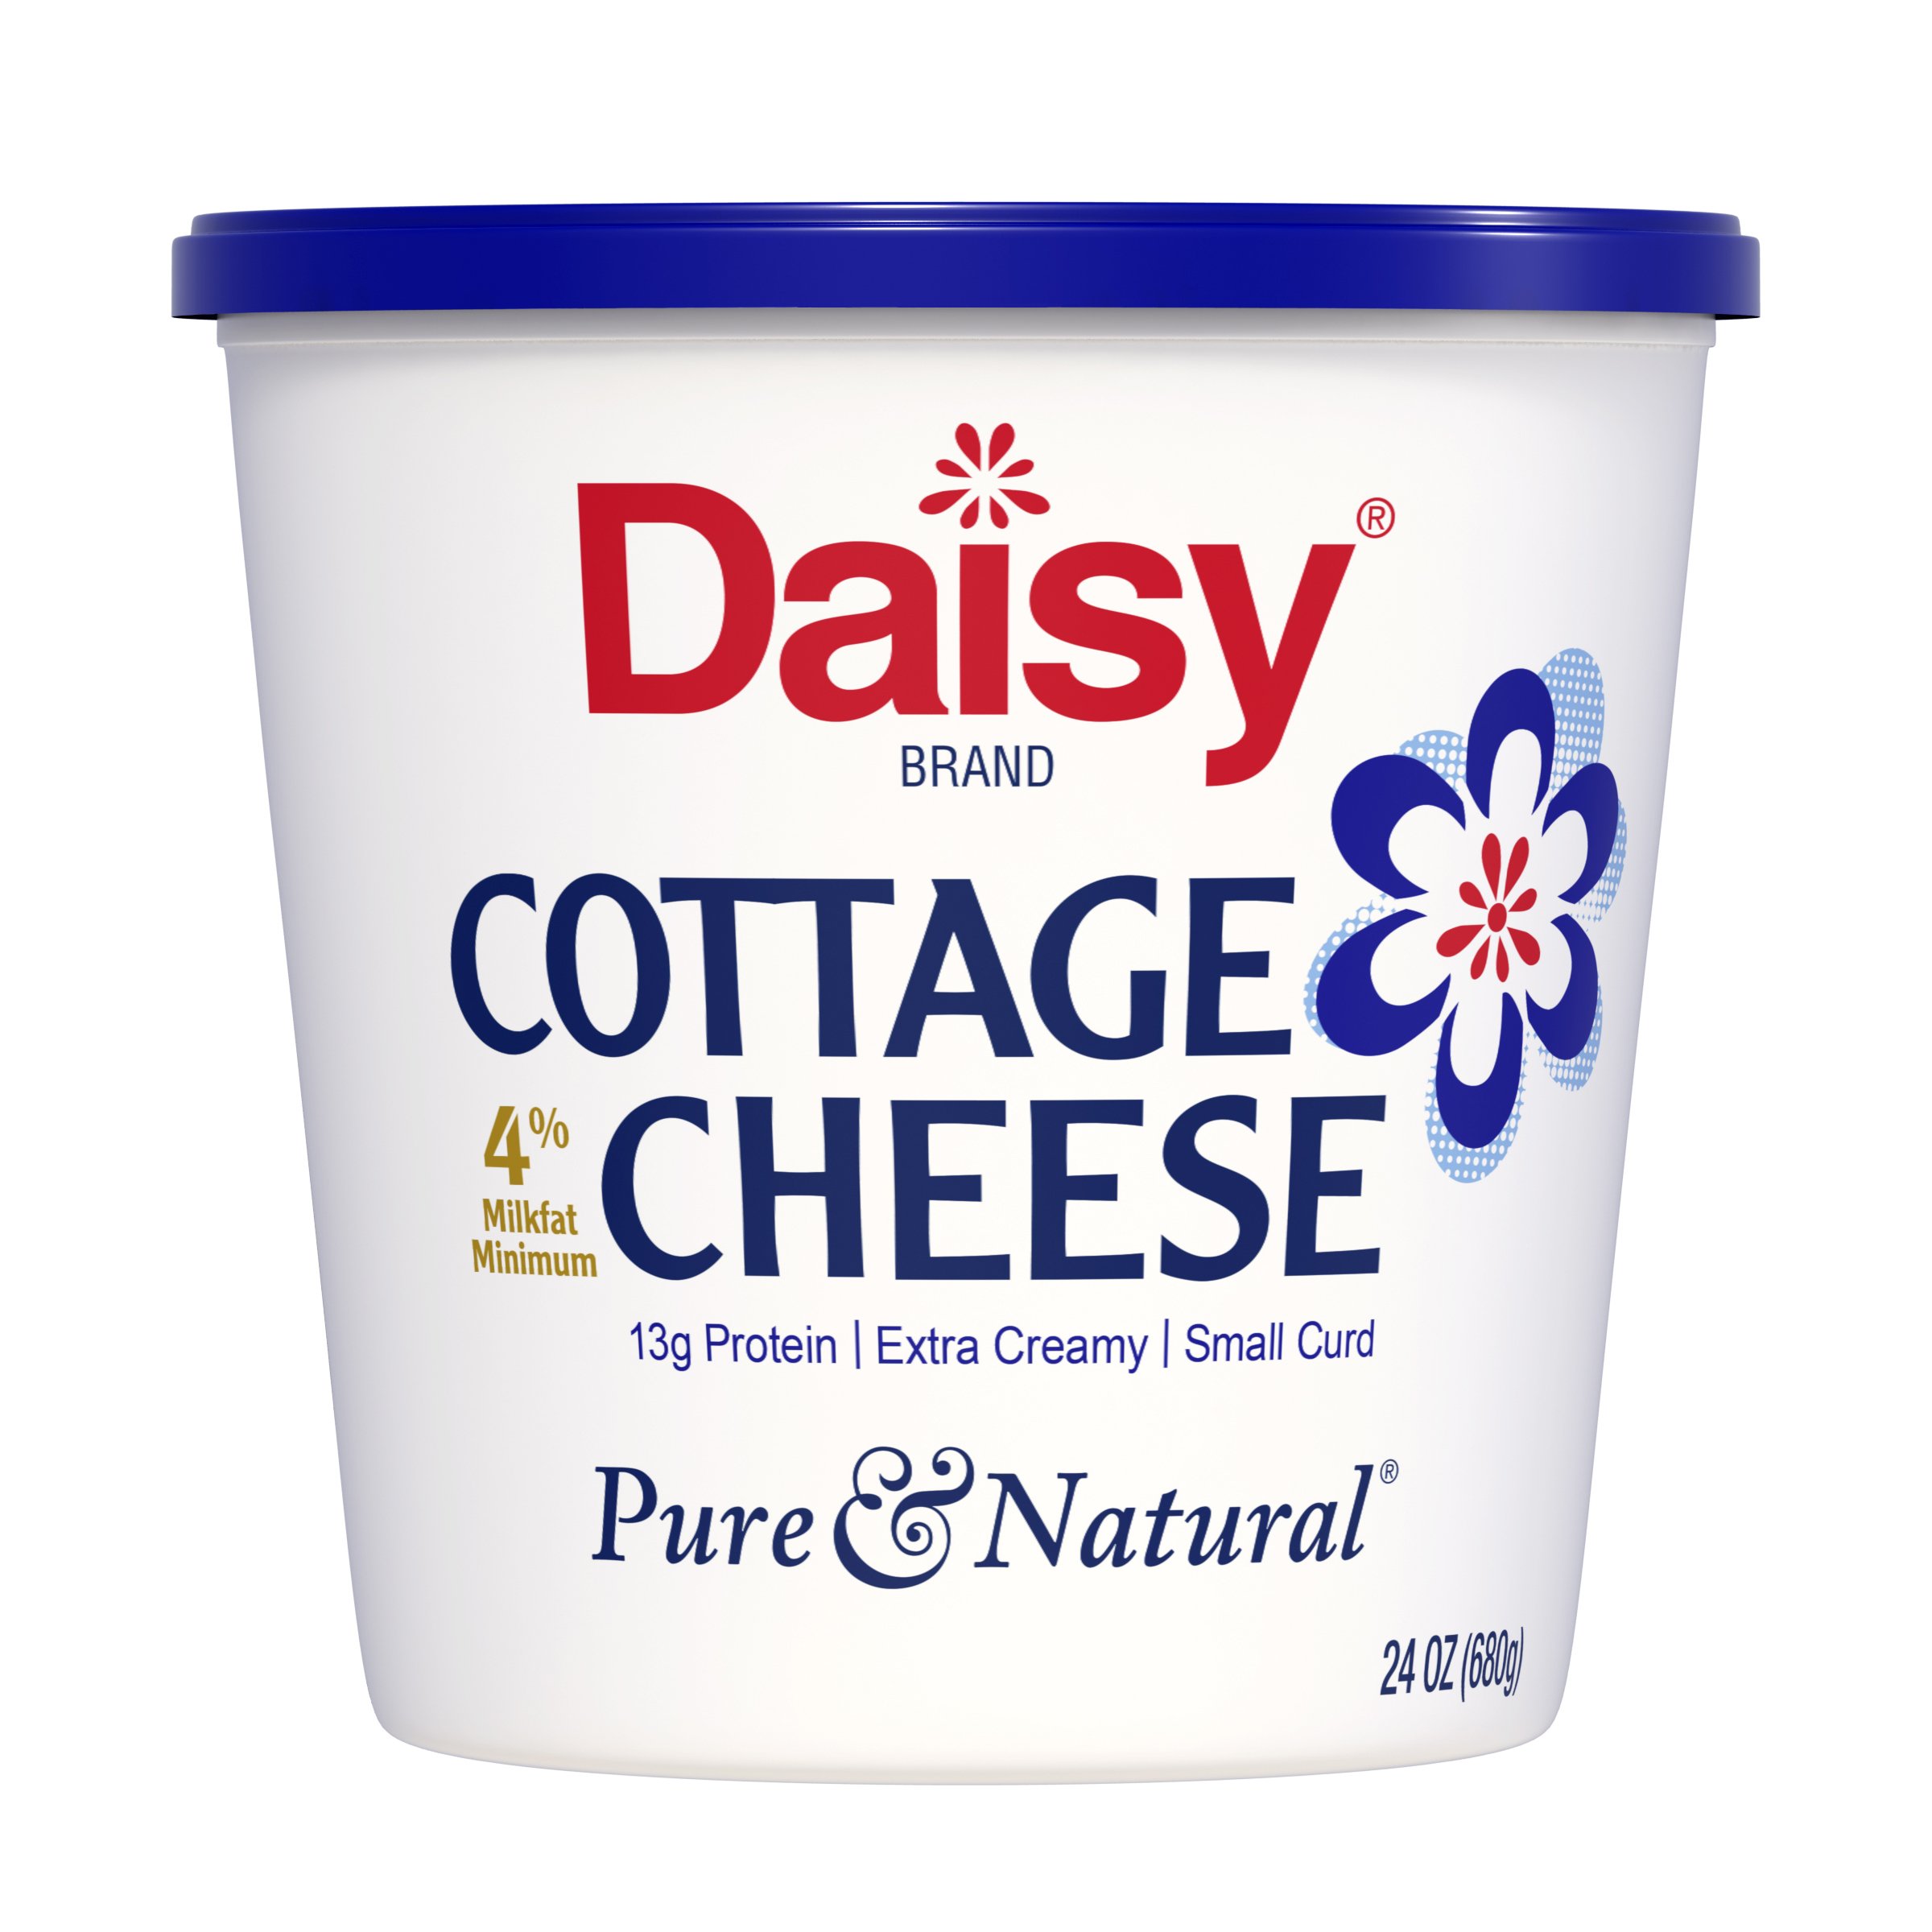 Daisy Small Curd 4 Milkfat Minimum Cottage Cheese Shop Cottage Cheese At H E B